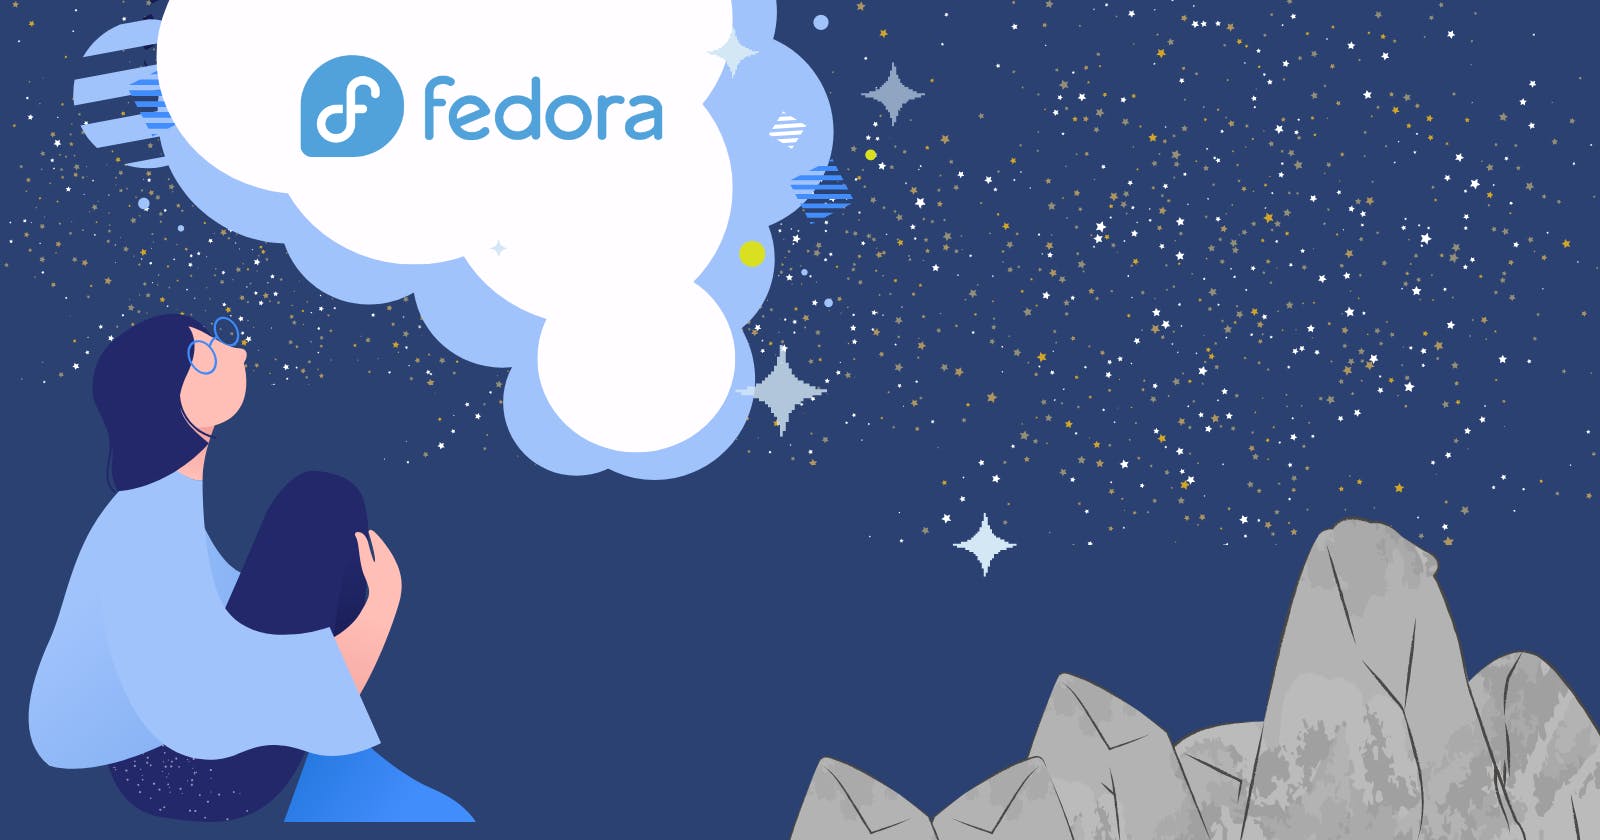 The Future With Fedora